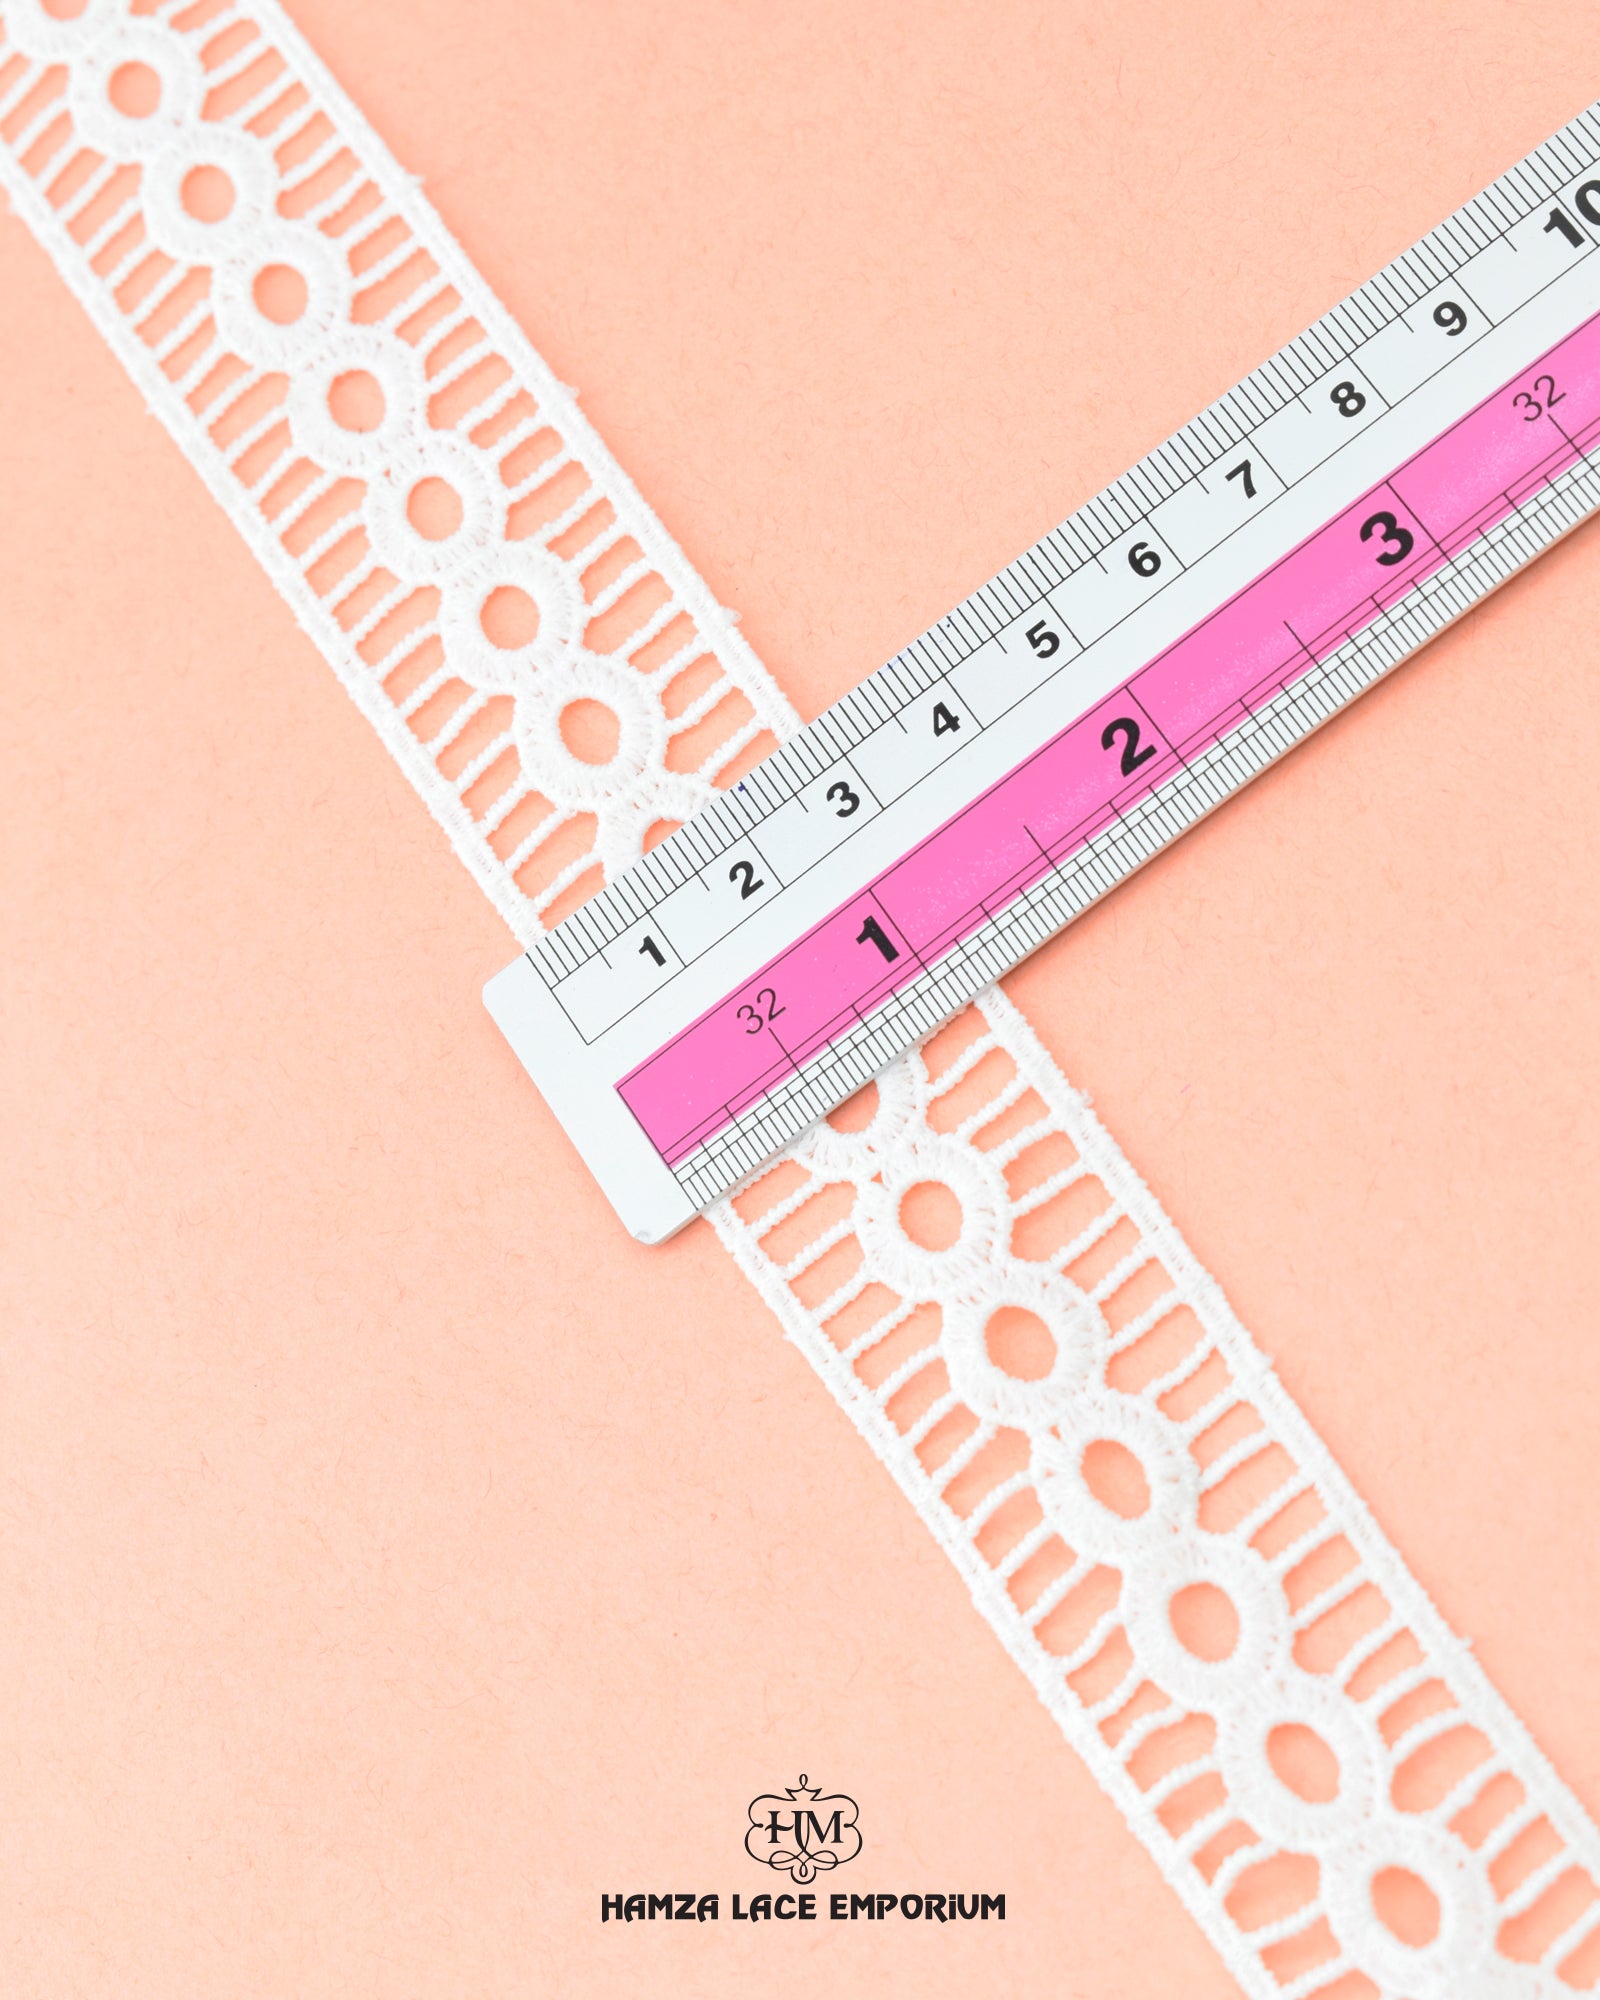 Size of the 'Two Side Filling Lace 2532' is given as 1.25 inches with the help of a ruler